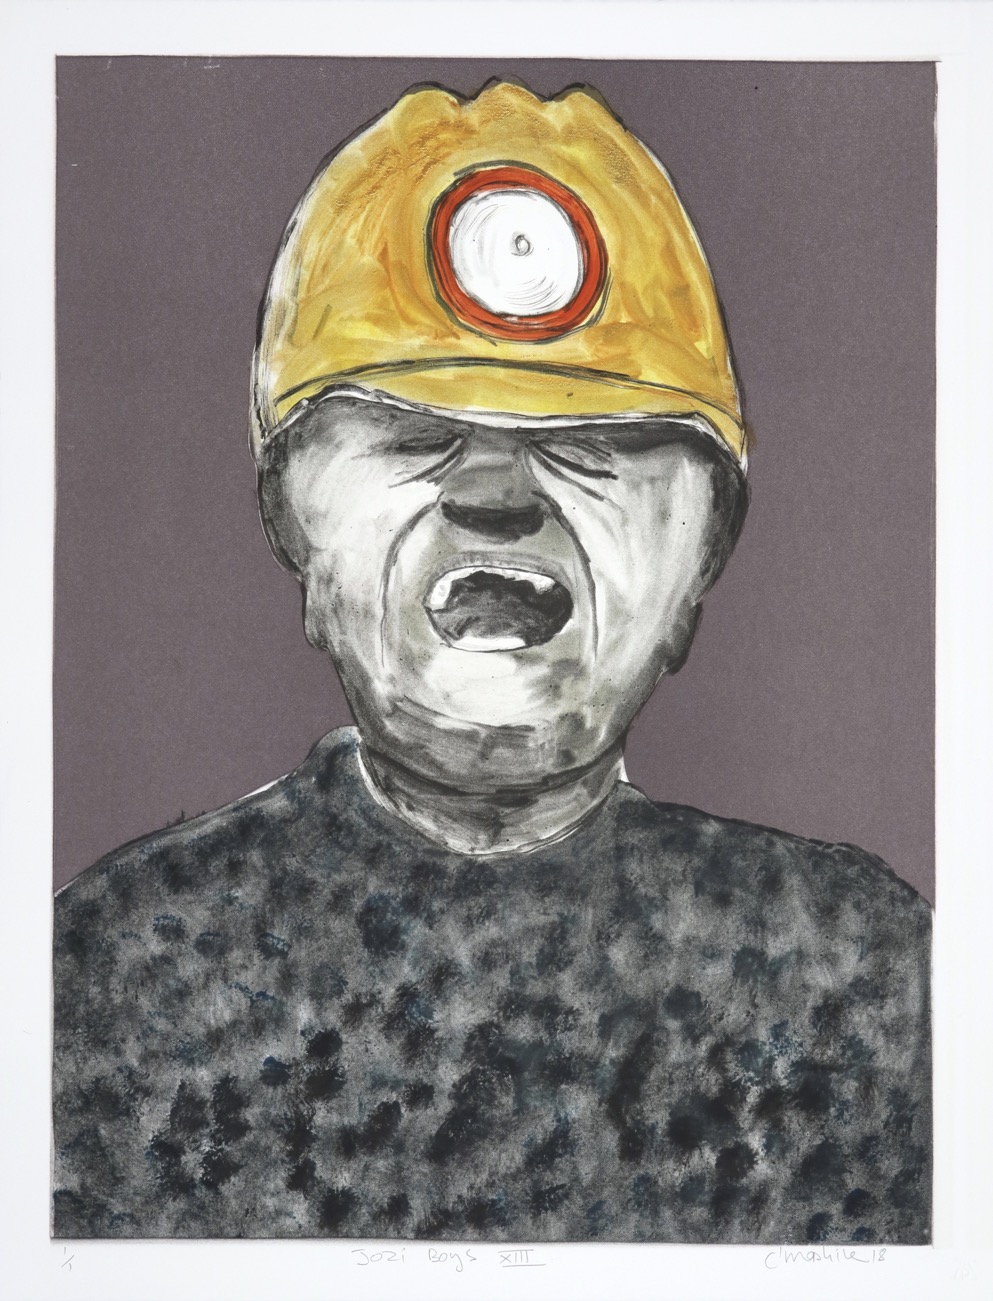 Portrait of a miner with his eyes closed and mouth open